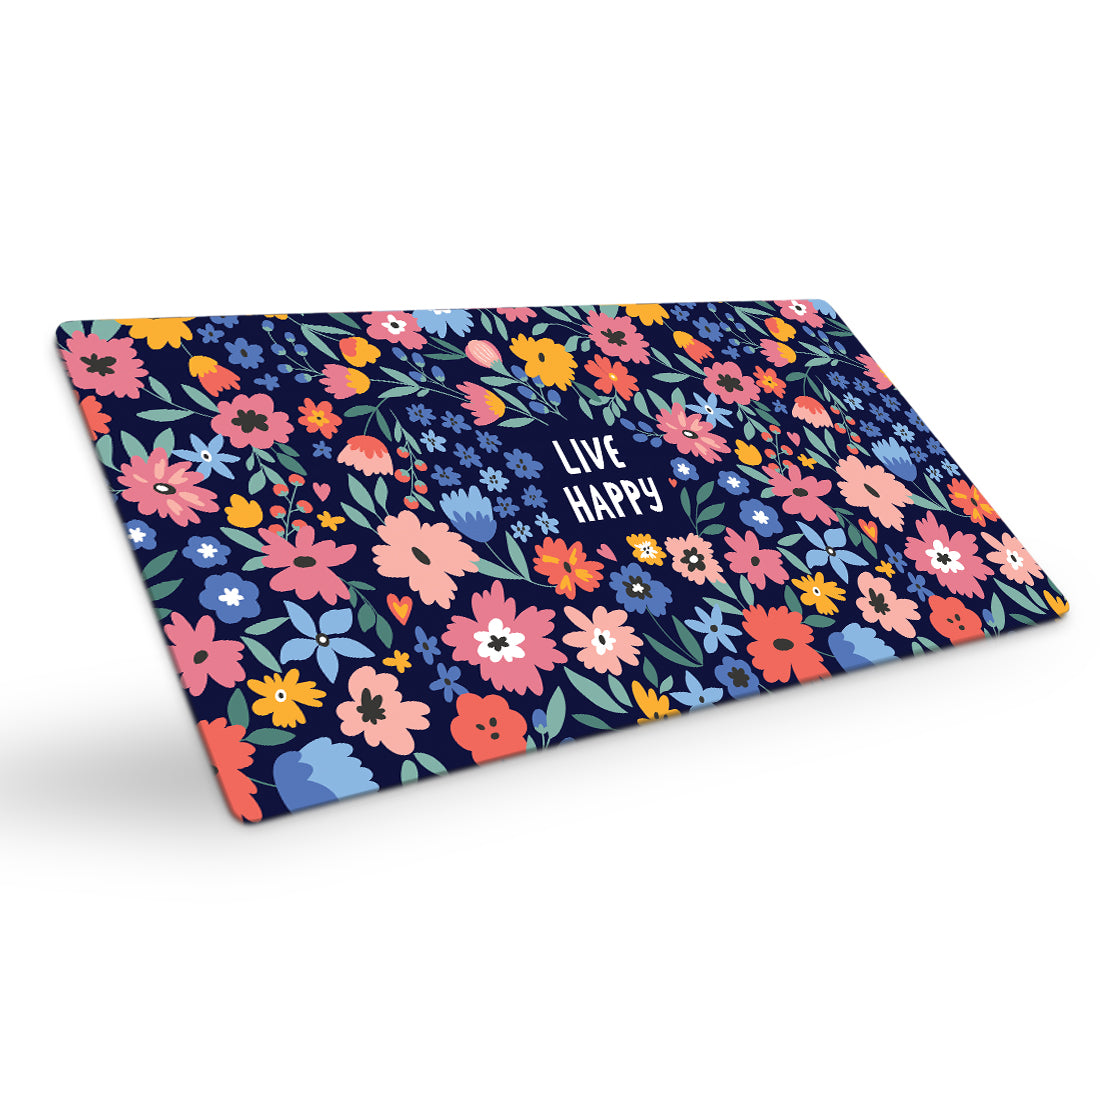 Desk Mat | Travel Friendly | 60 (w) x 30 (h) CM | Anti Slippery | Spacious for Desk | Rubber Bottom | Water Resistant | Multicolor | Easy to Clean | Illustrated (Live Happy)